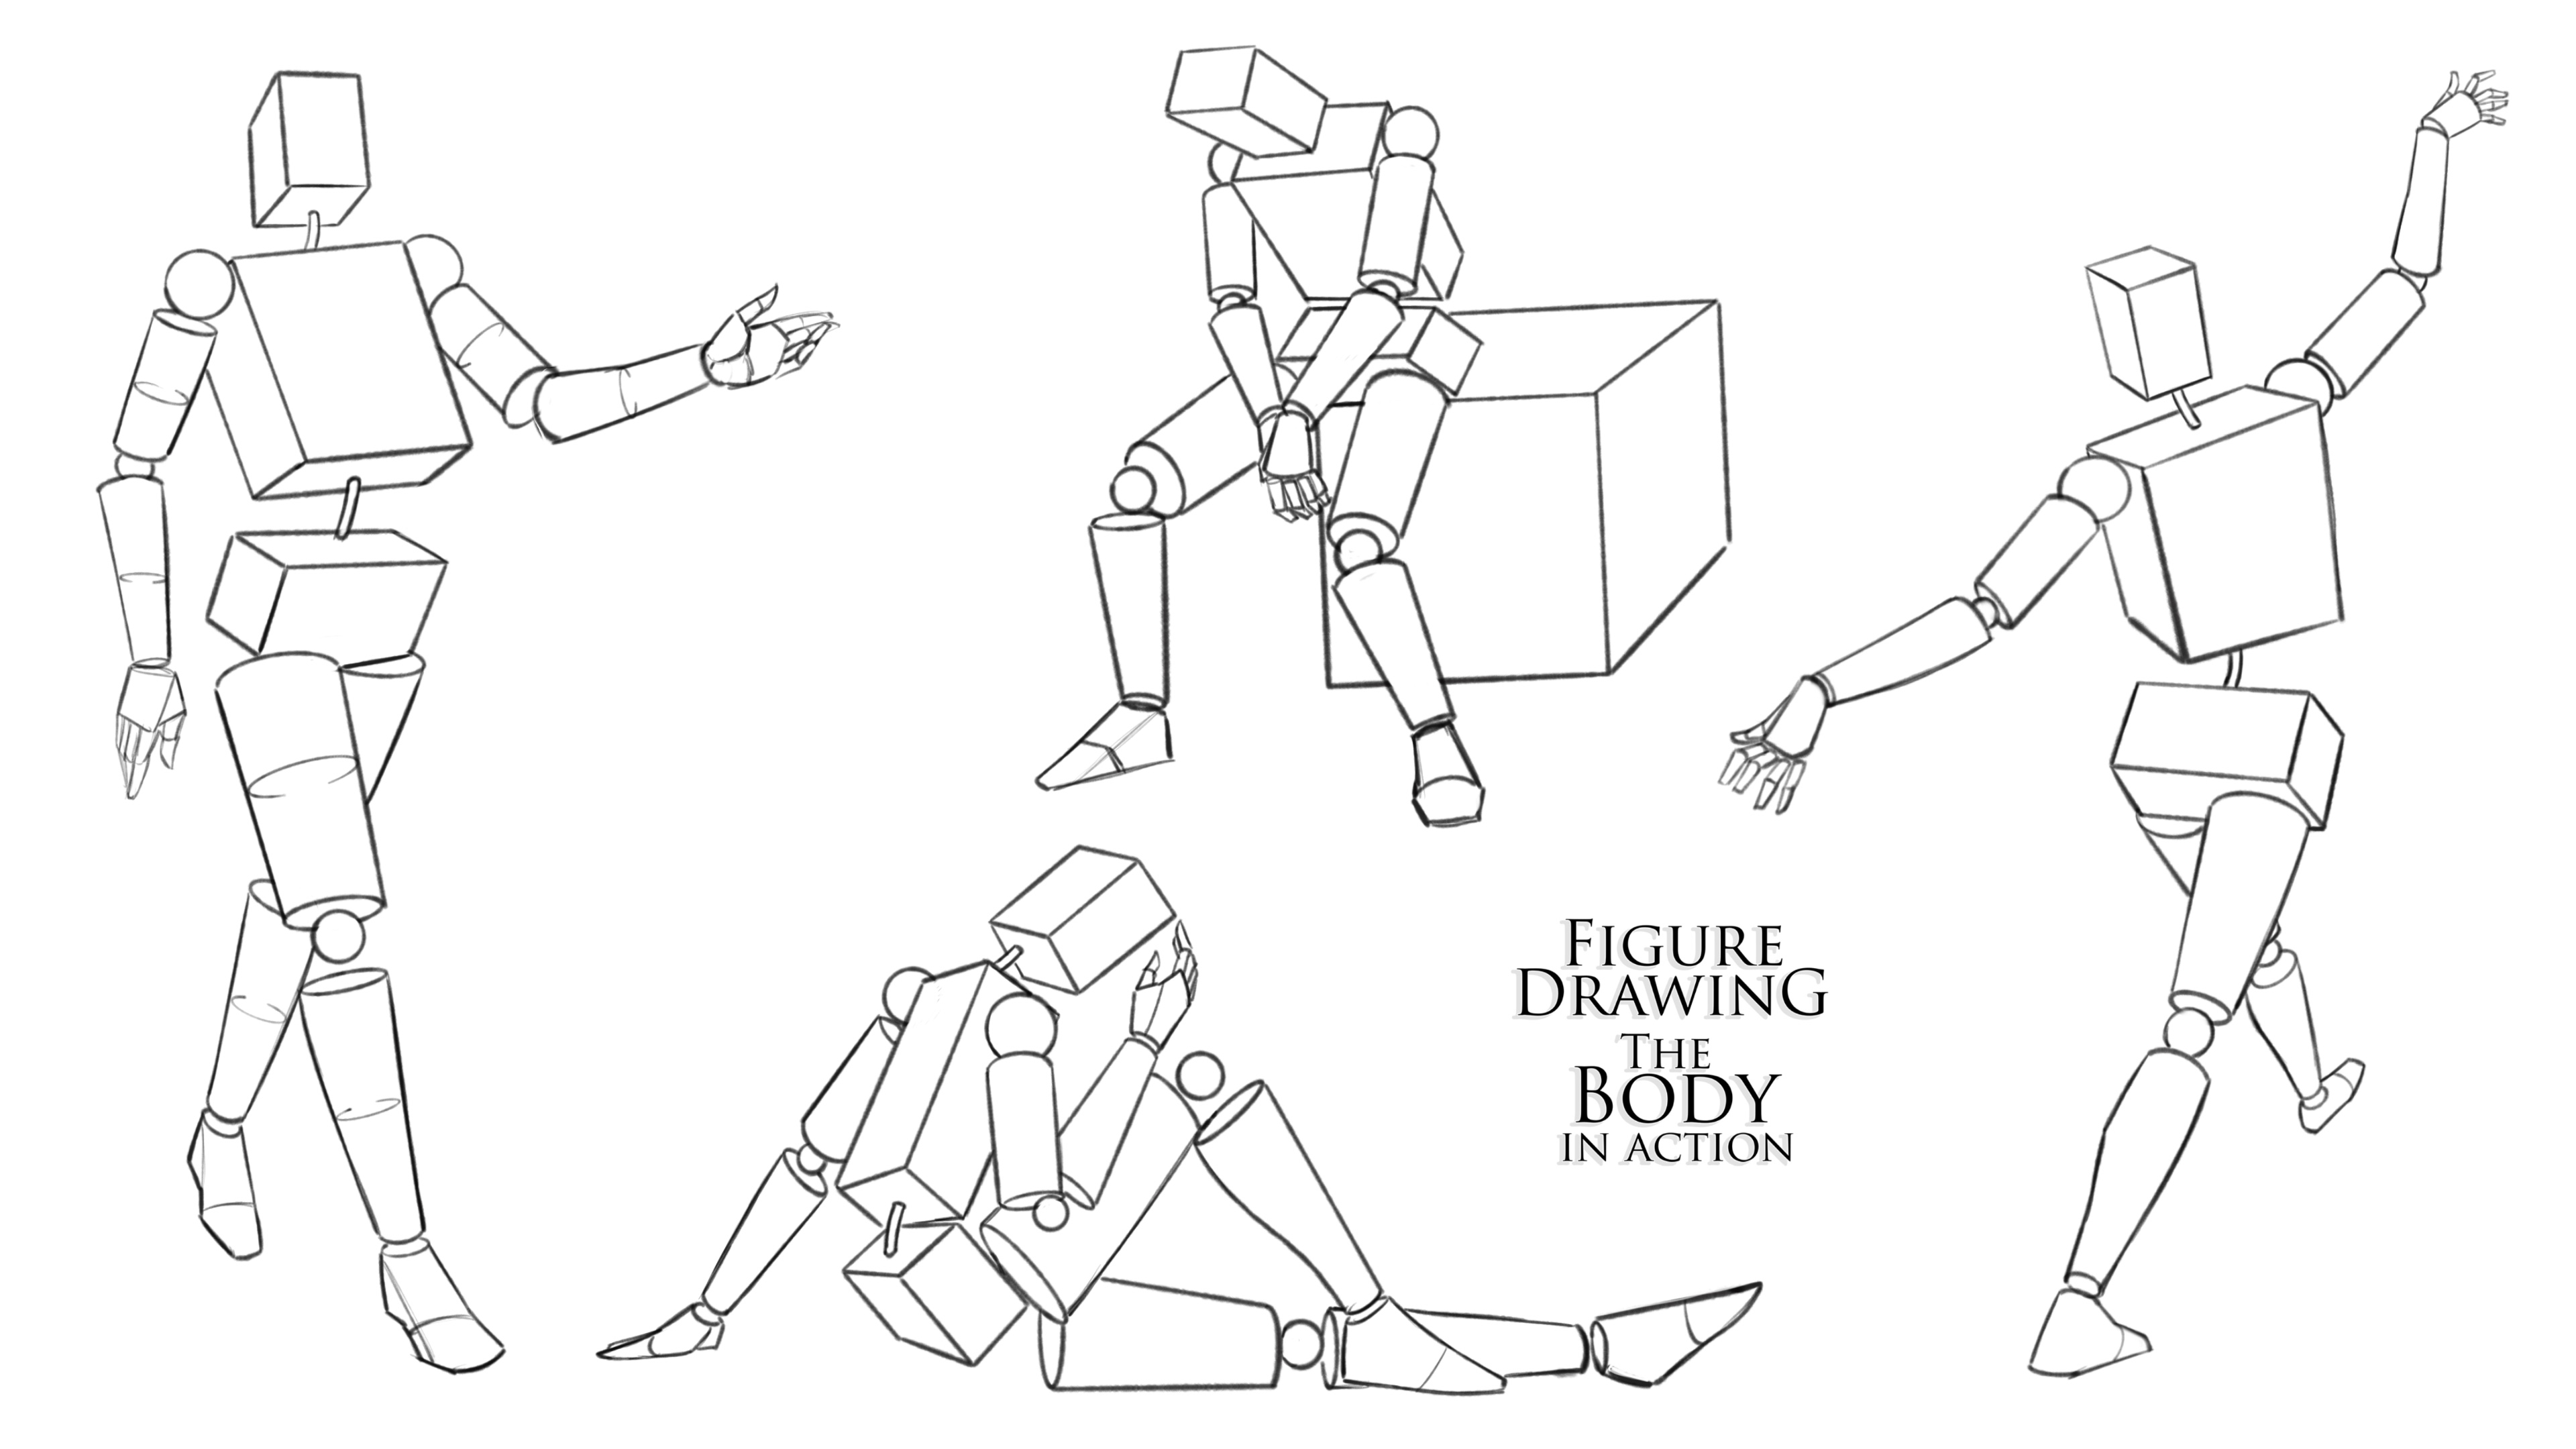 Figure Drawing - The Body in Action